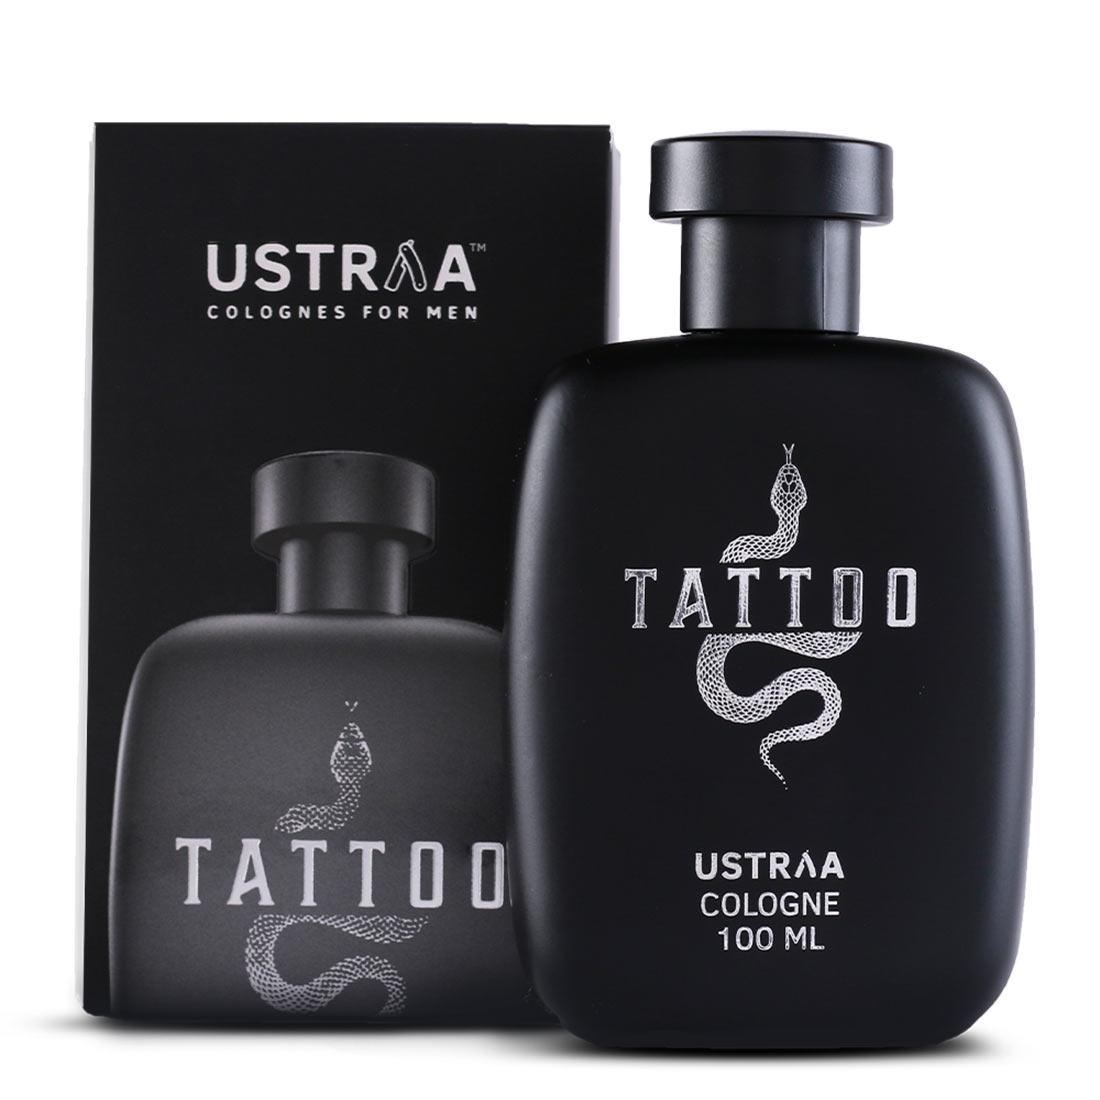 Ustraa Tattoo Cologne Perfume for Men - 100 ml - An Edgy and Long Lasting Fragrance for All Day Use